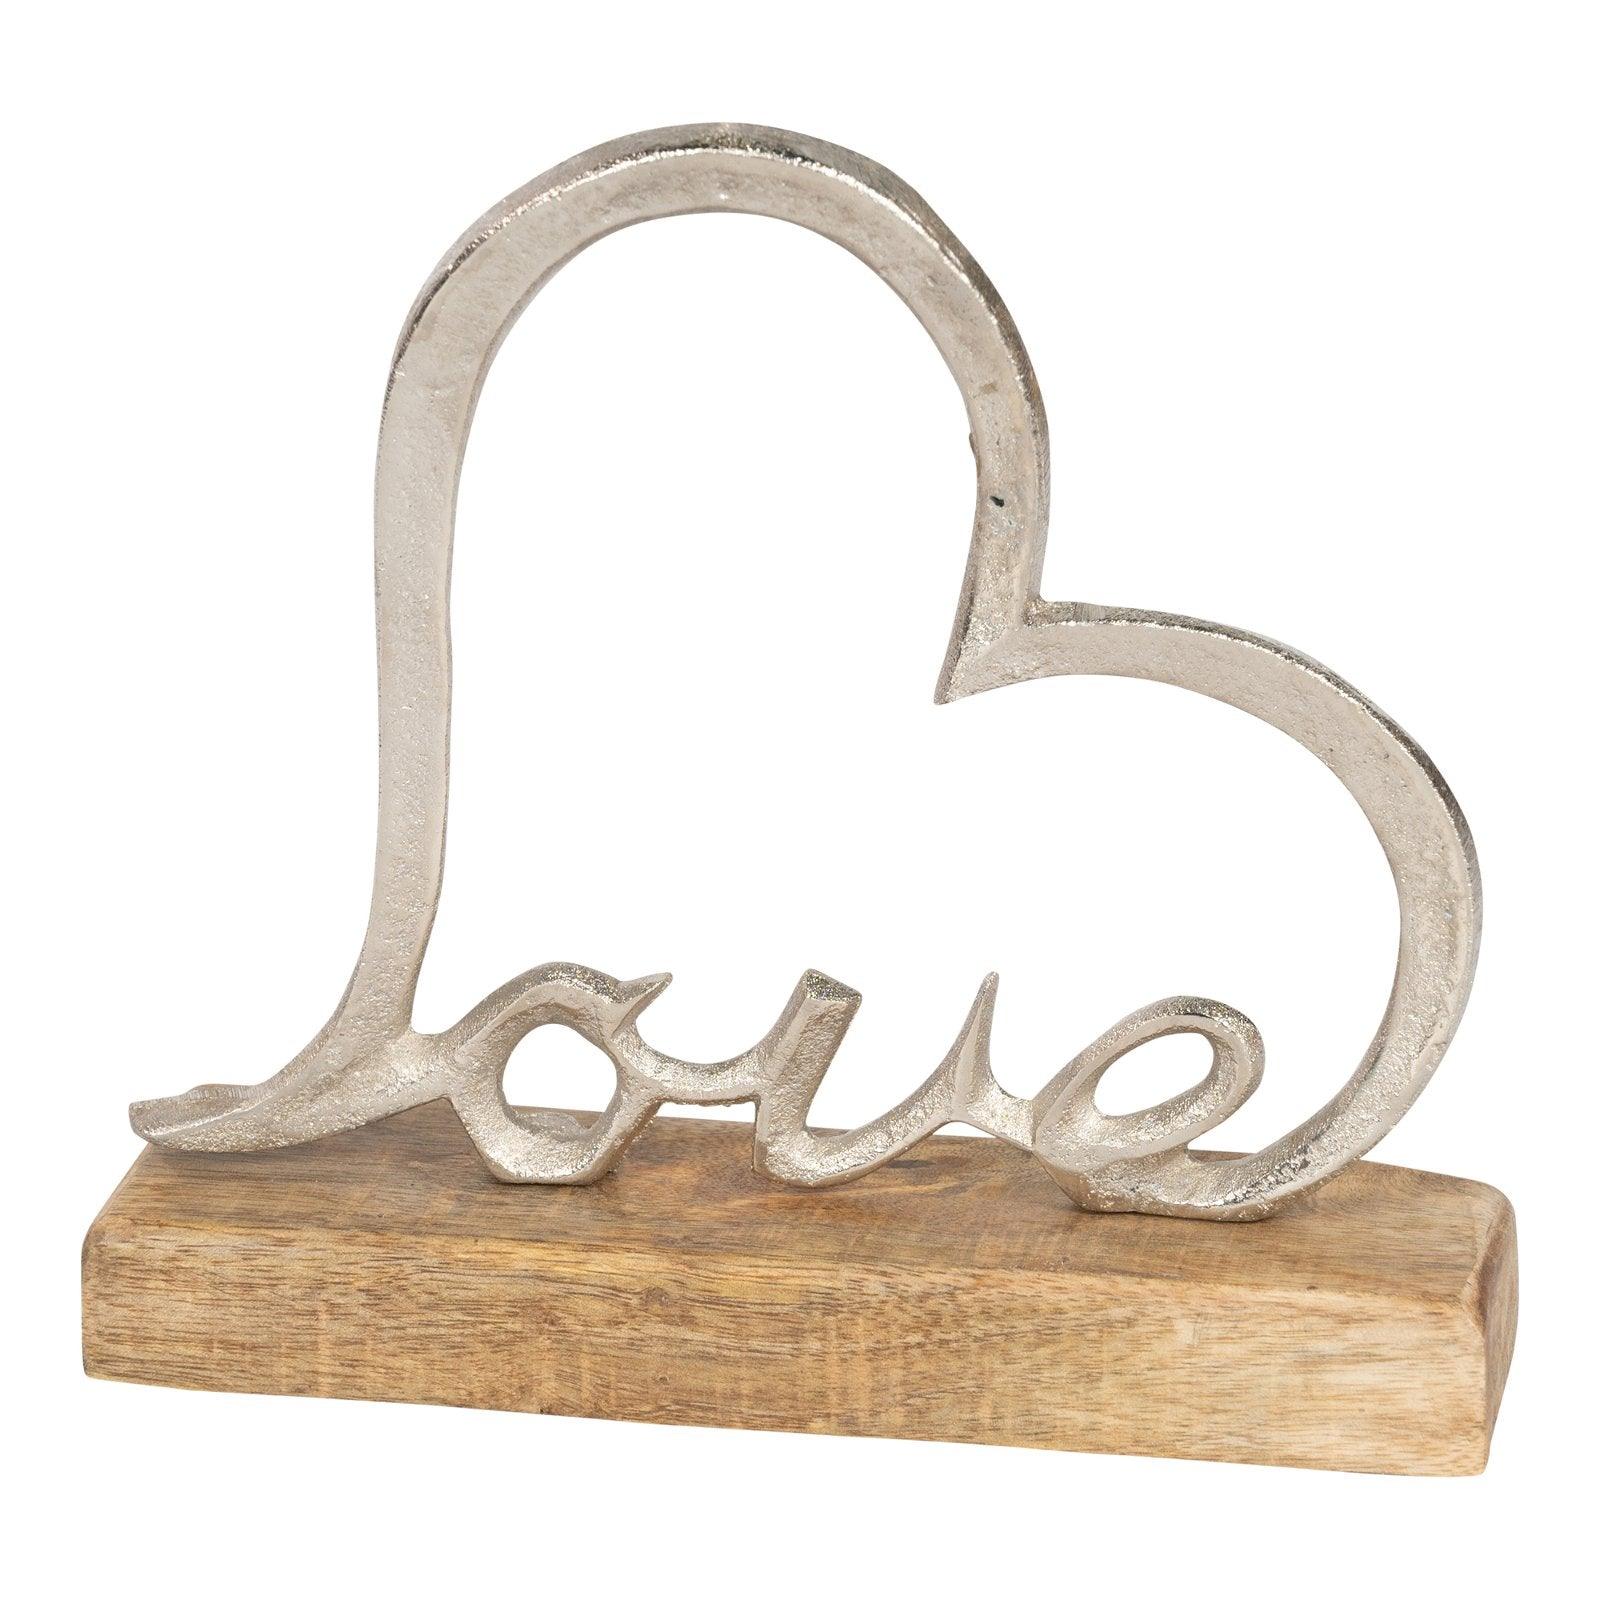 View Metal Heart of Love On A Wooden Base information